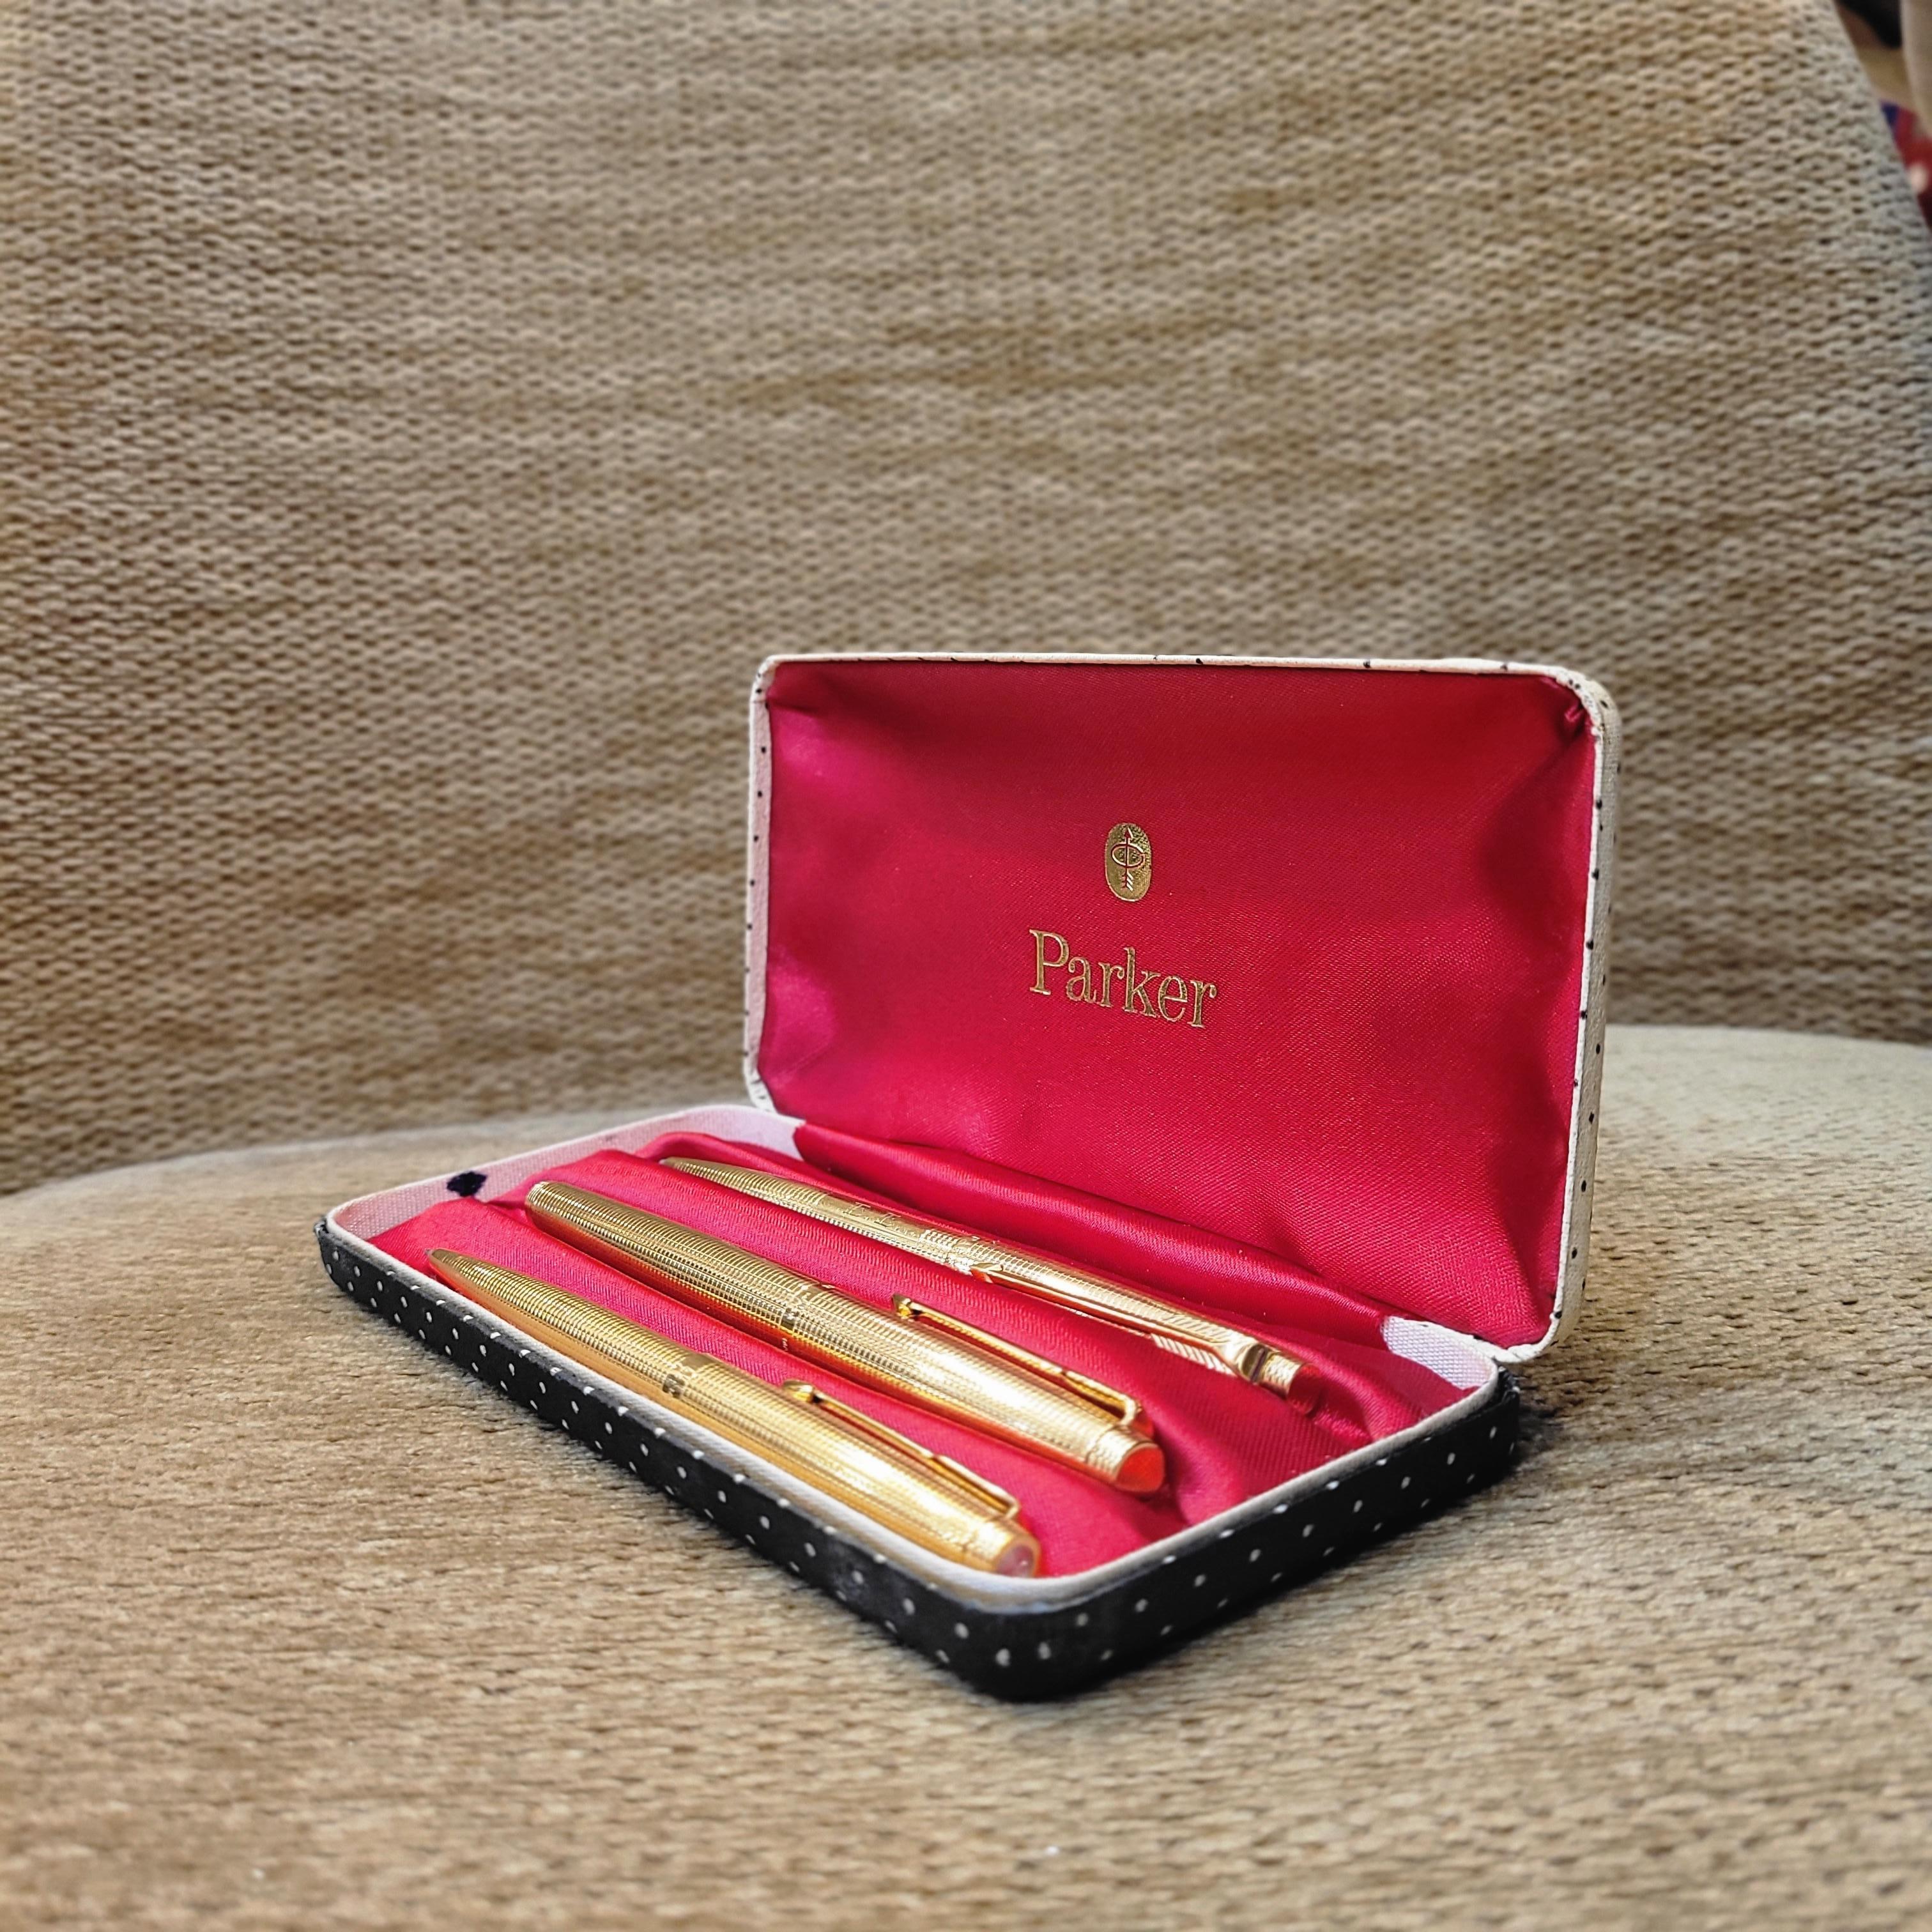 Parker 75 Custom Insignia writing set with case, 14k gold plated, 70's.
Excellent Parker writing set, consisting of a fountain pen, ballpoint pen and model 75 Custom Insignia mechanical pencil in its original case. Each of the three pieces retains